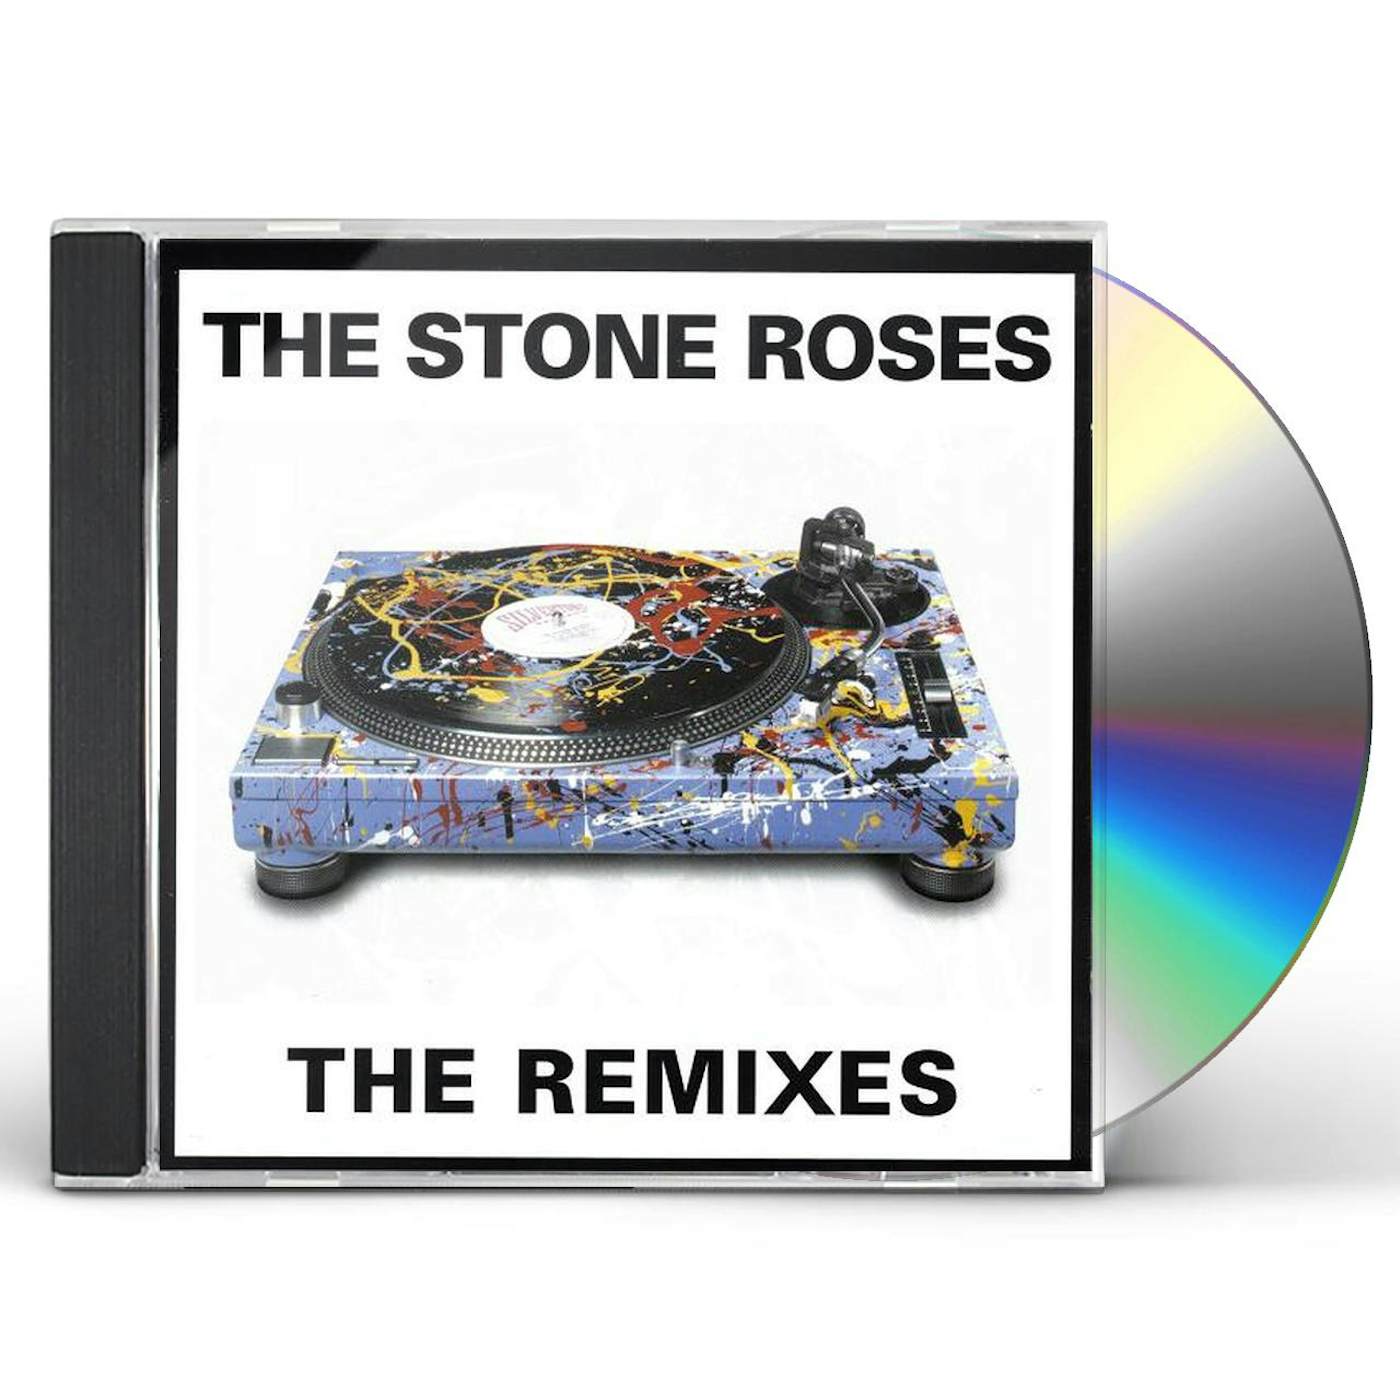 The Stone Roses REMIXES CD